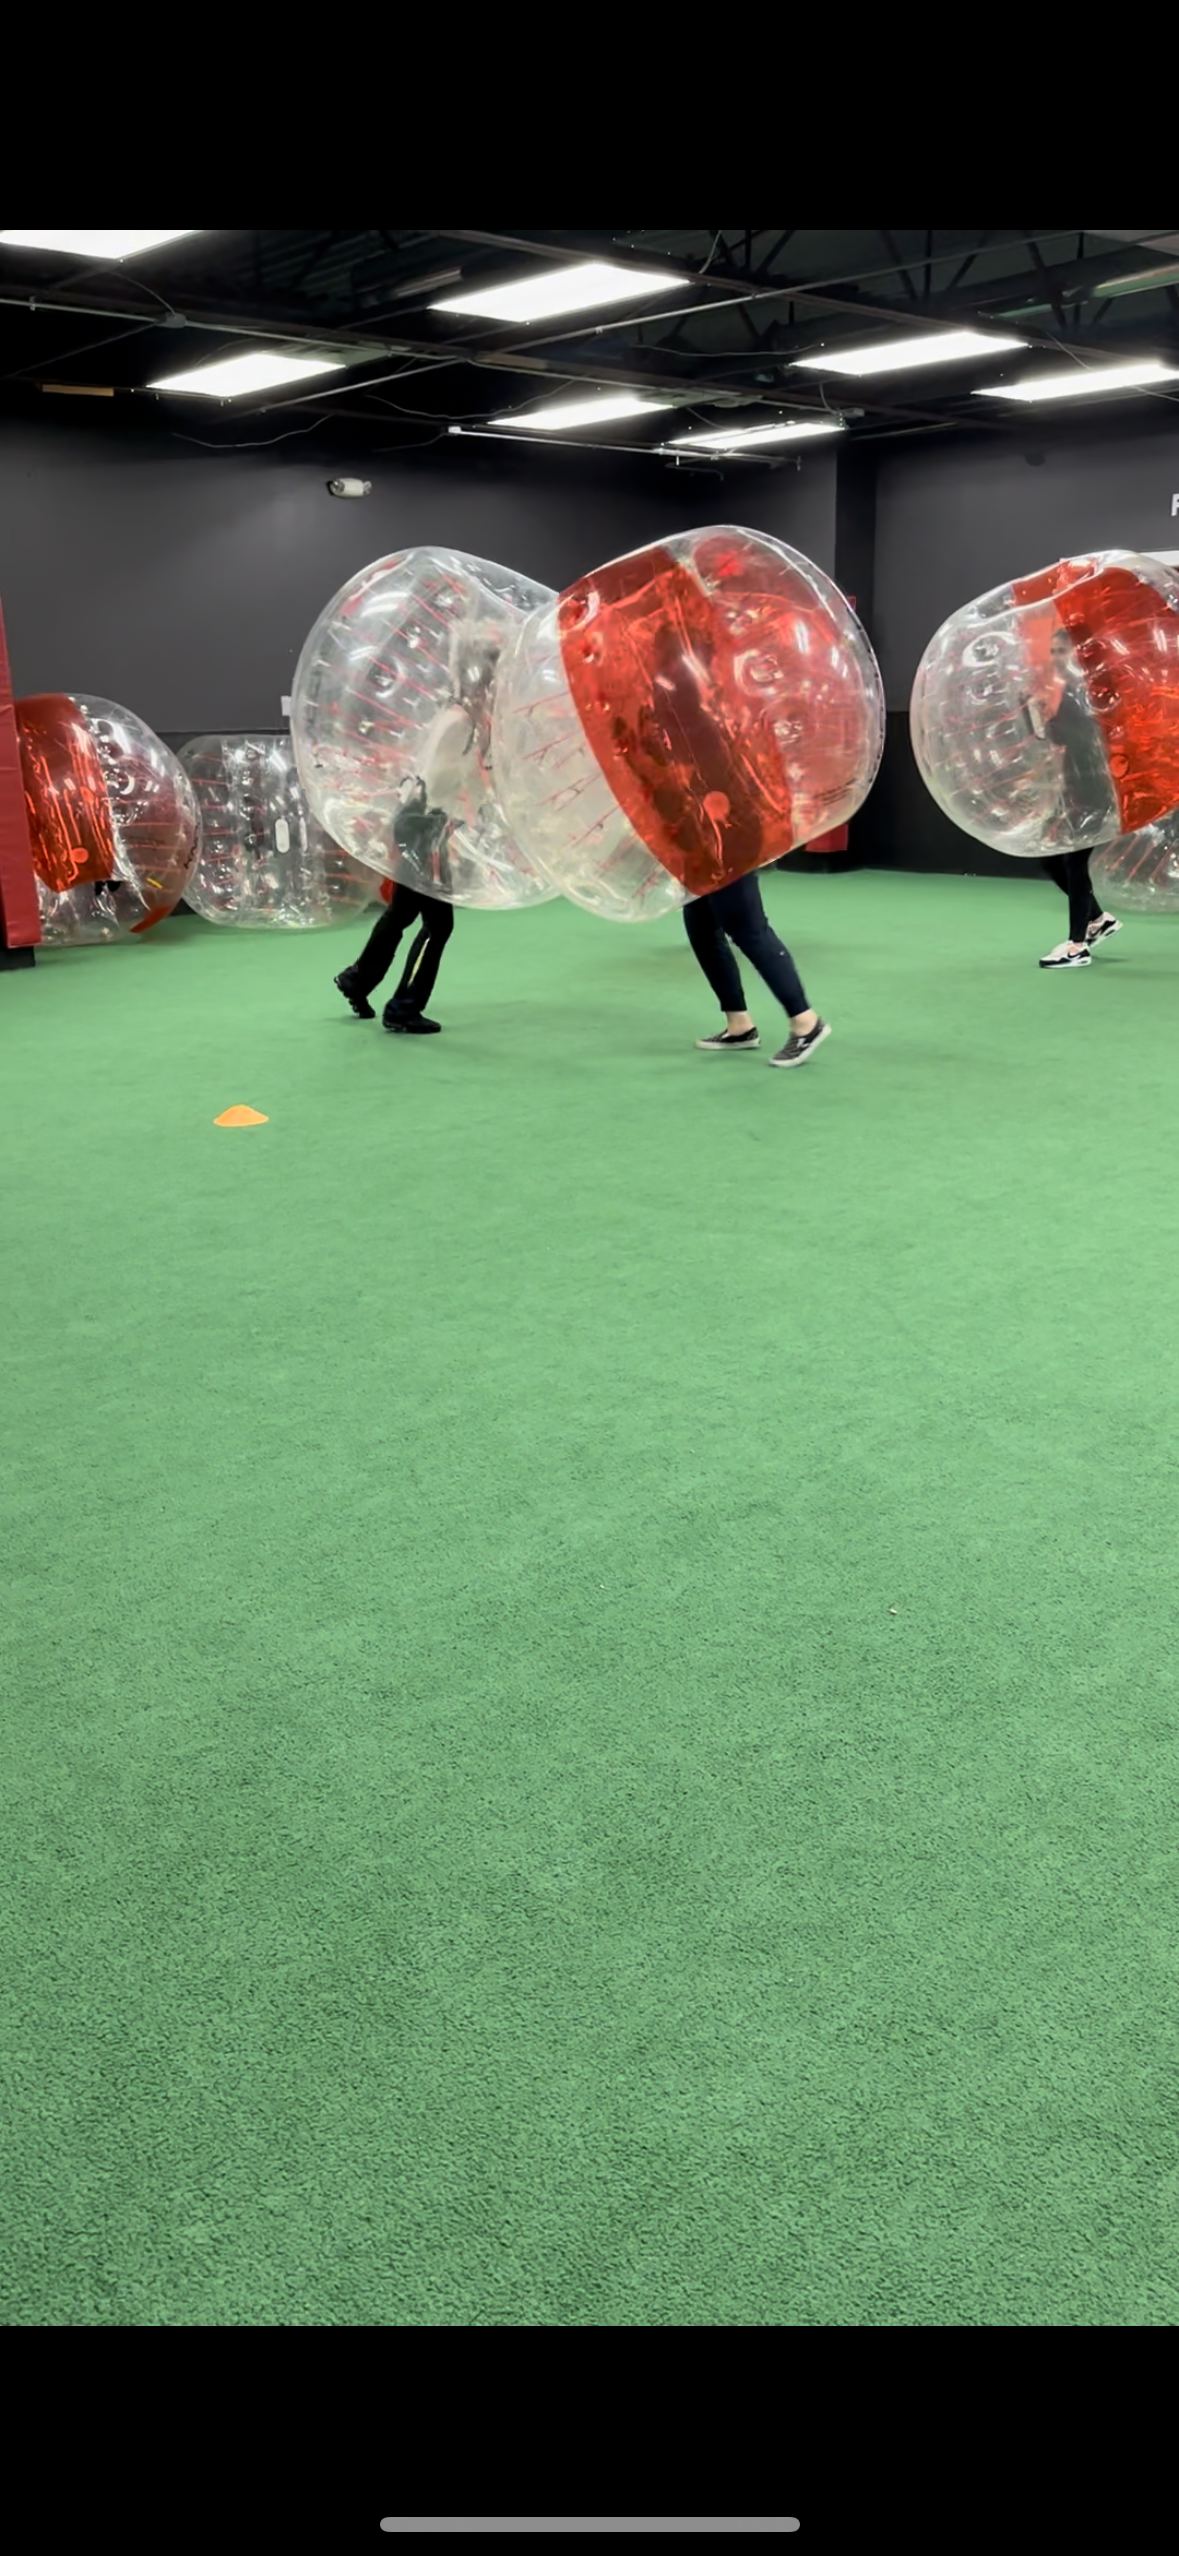 Up To 6 Knockerball Players 1.5 Hour Play